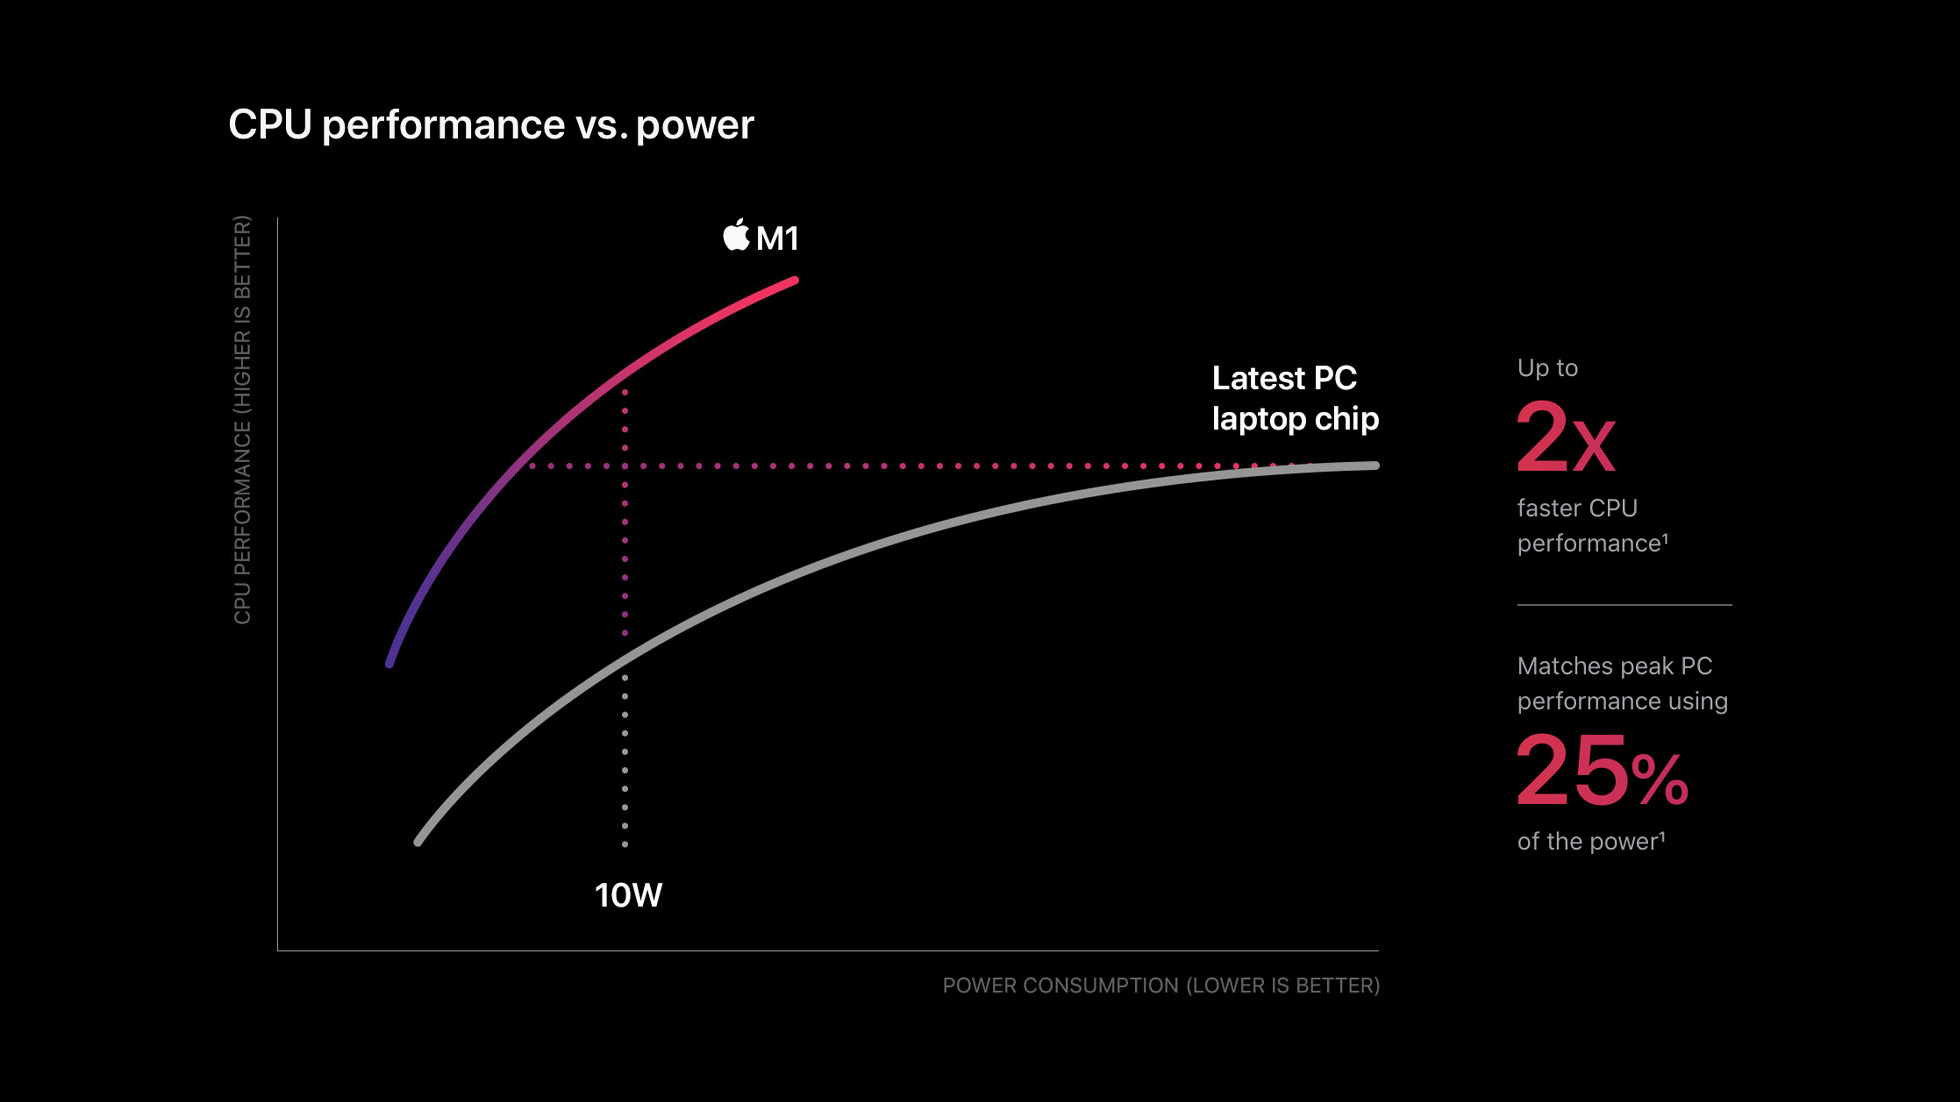 Graph from Apple displaying relative performance vs power, with no labels, and exceptionally vague implications